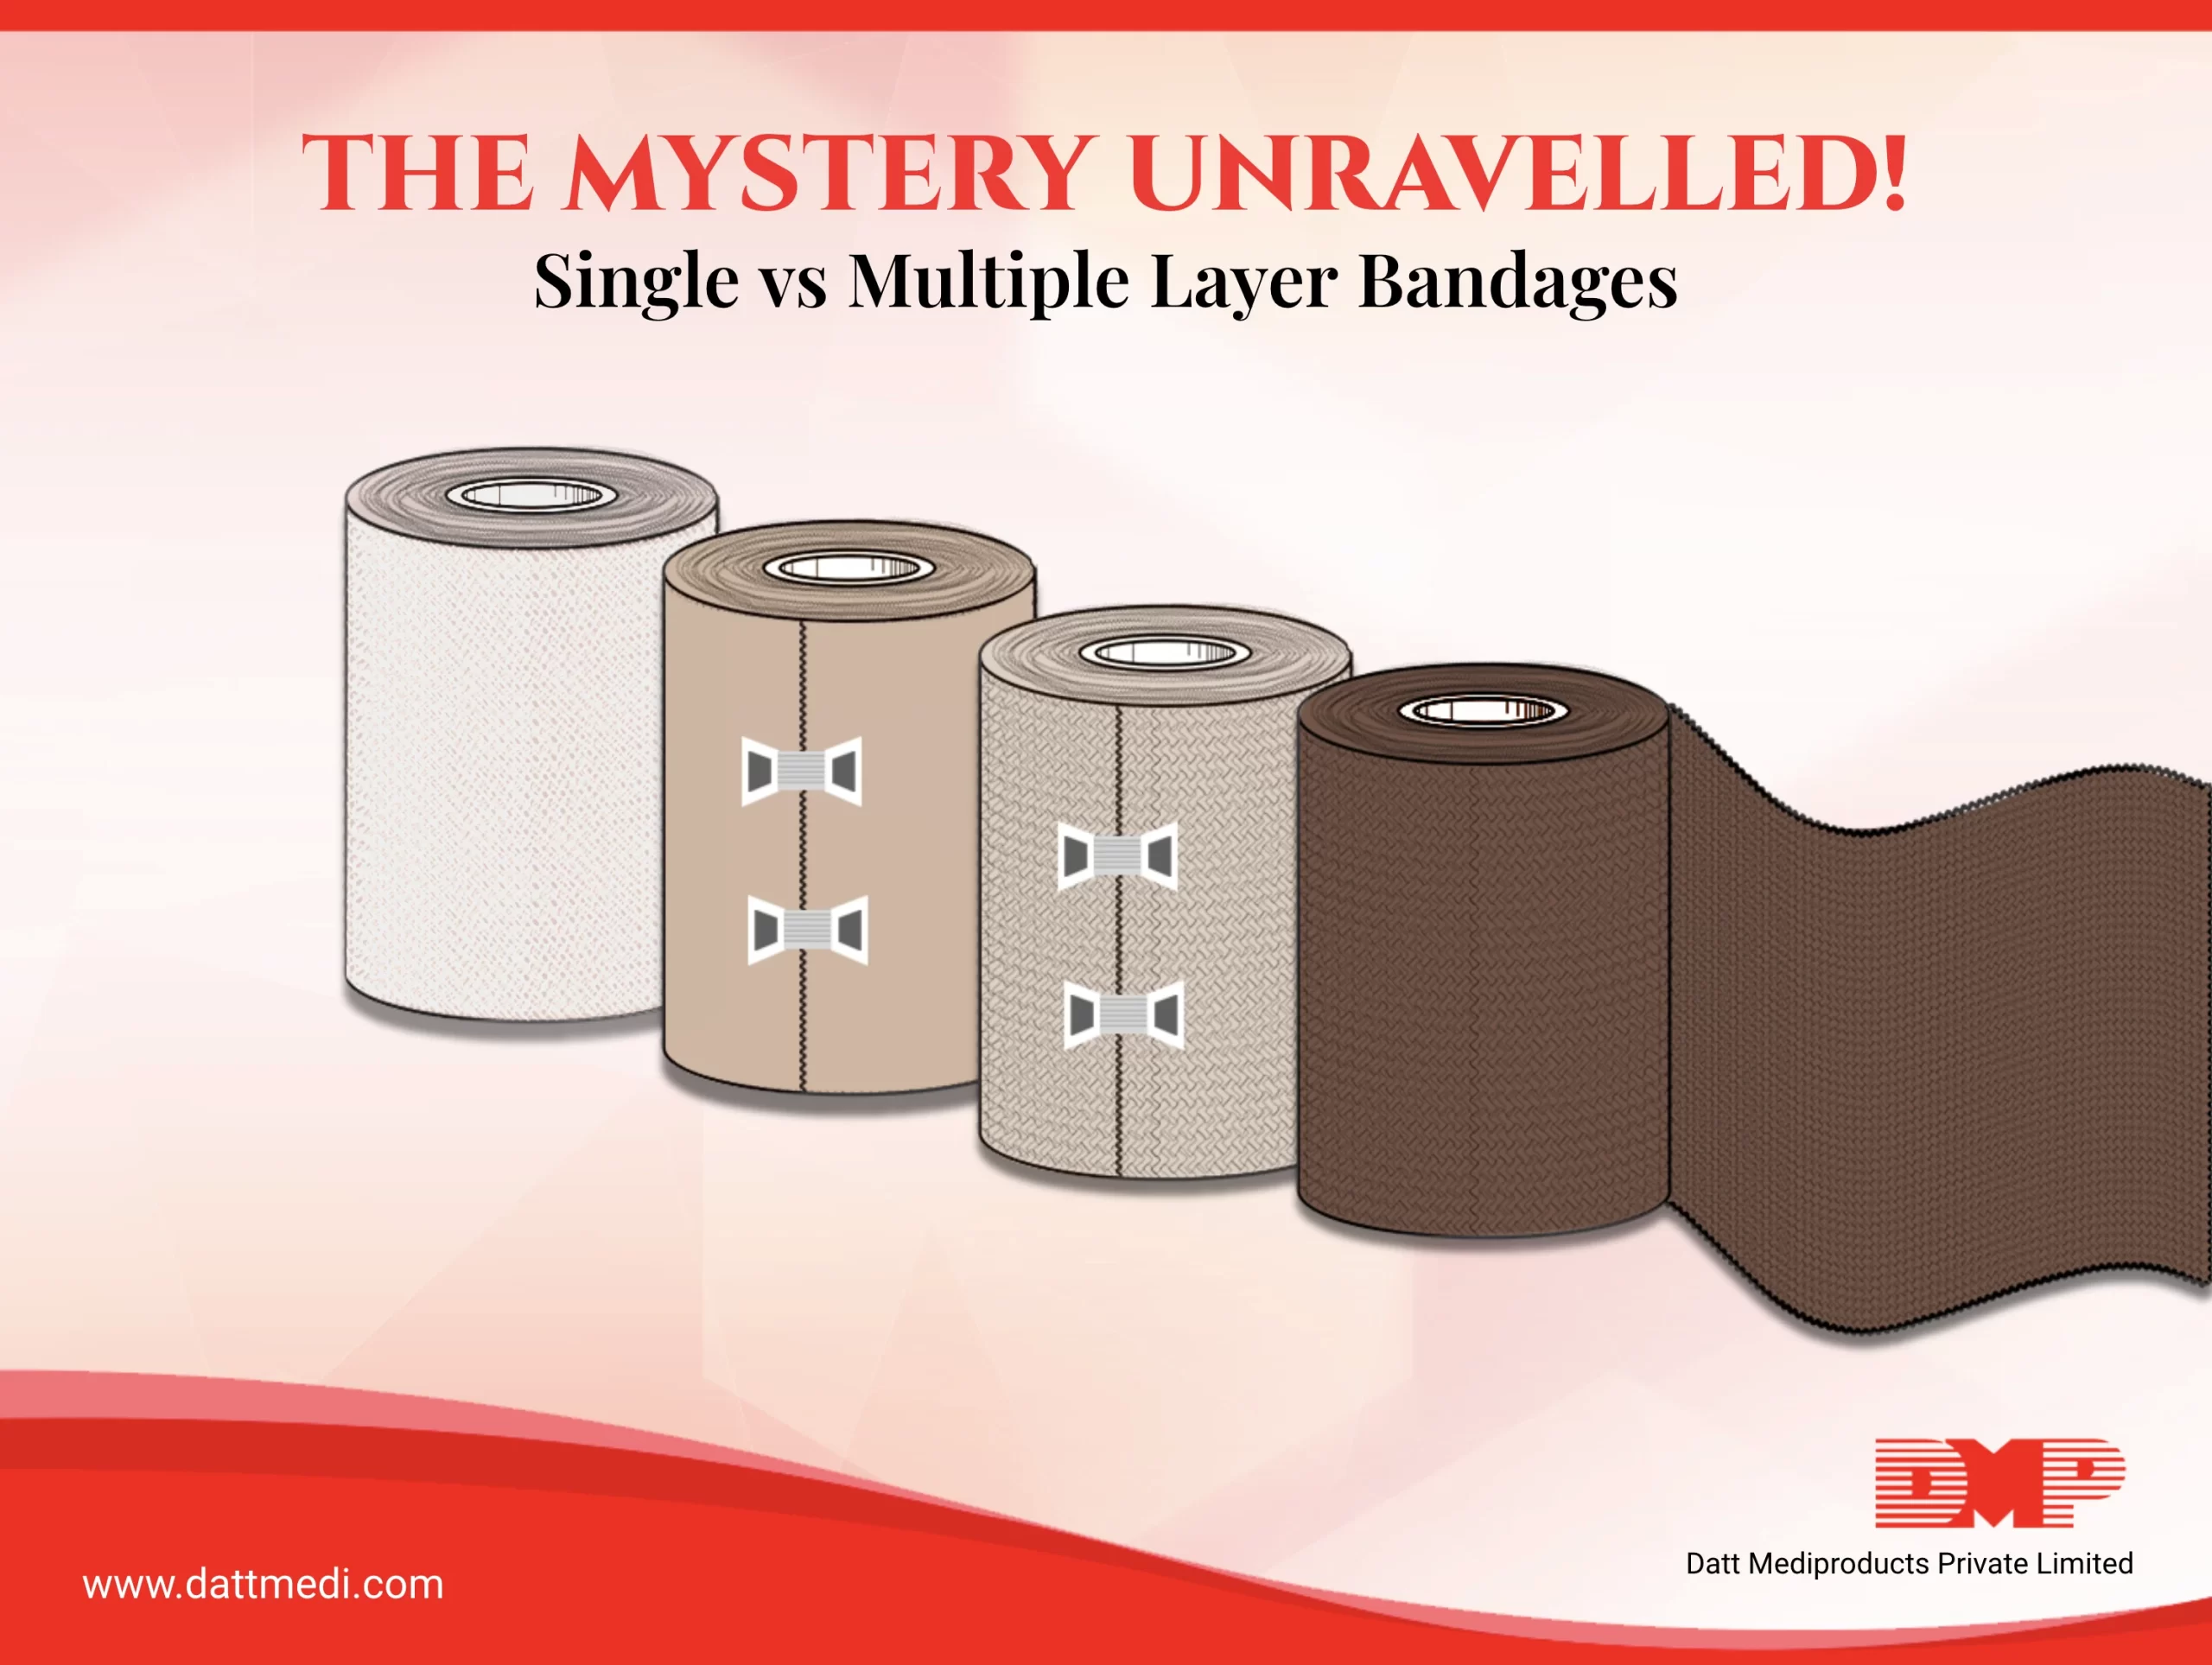 Single Vs Multiple Layer Bandages – The Mystery Unravelled!